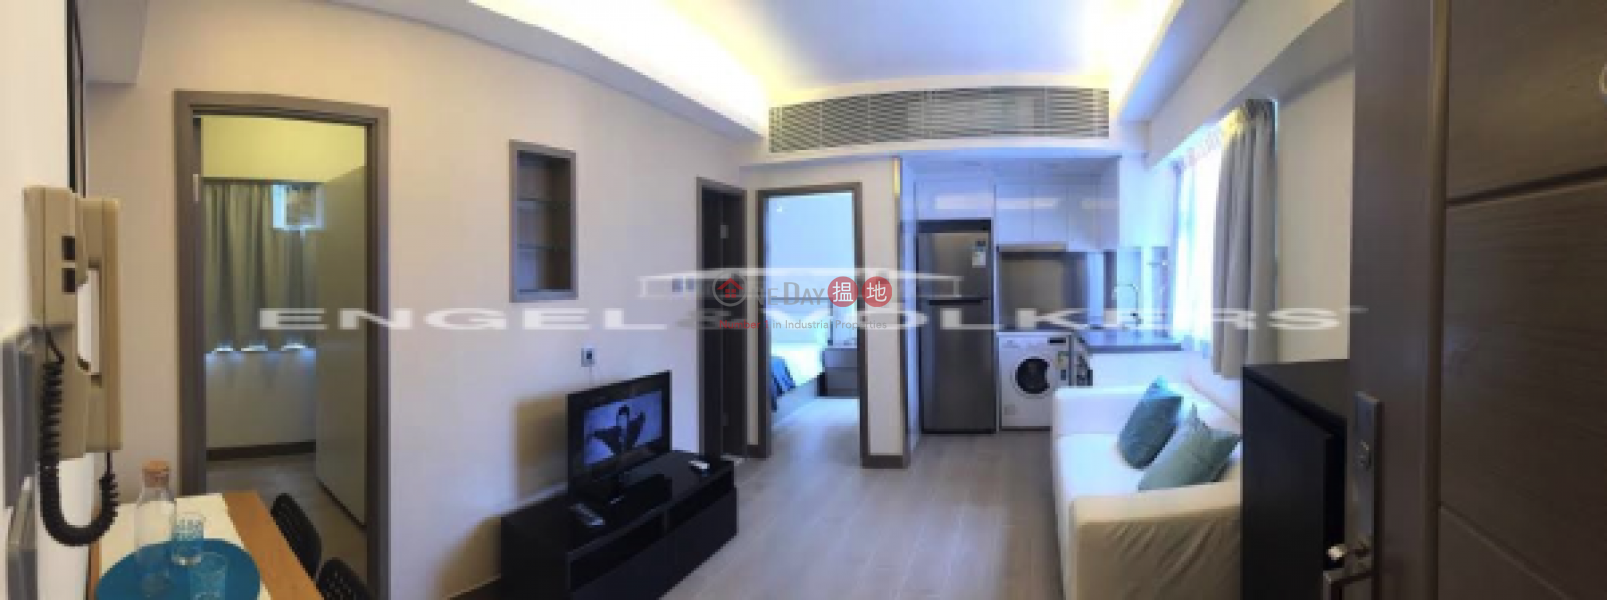 2 Bedroom Flat for Sale in Sai Ying Pun, Manifold Court 萬林閣 Sales Listings | Western District (EVHK42468)